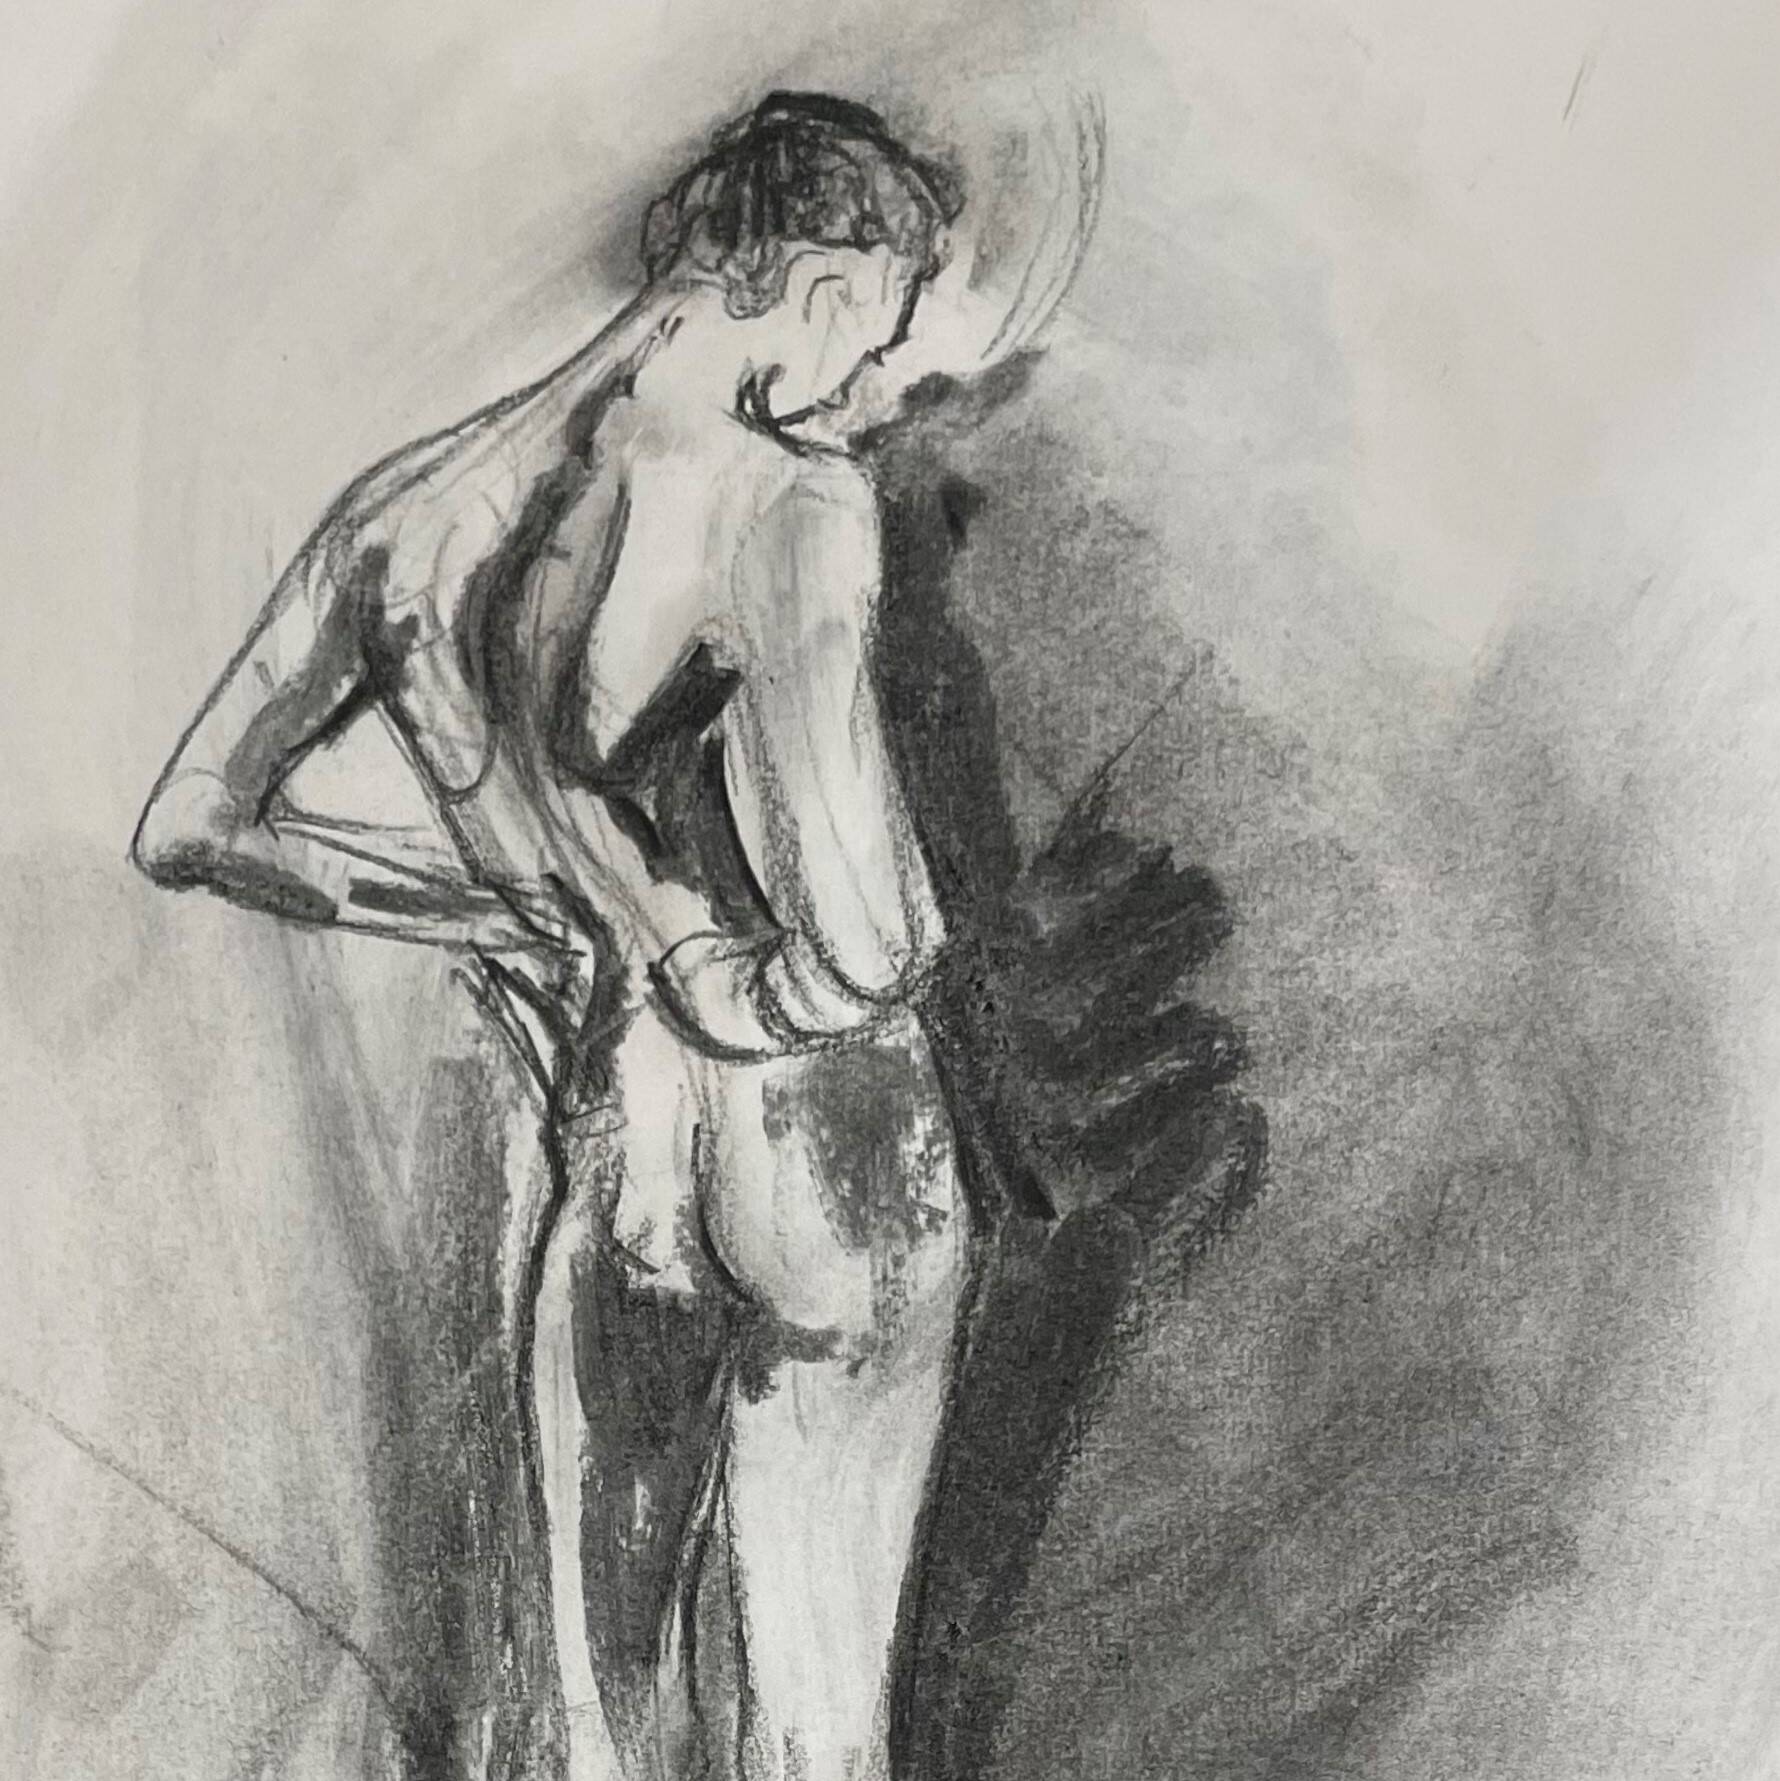 Adult learning | Observational life-drawing